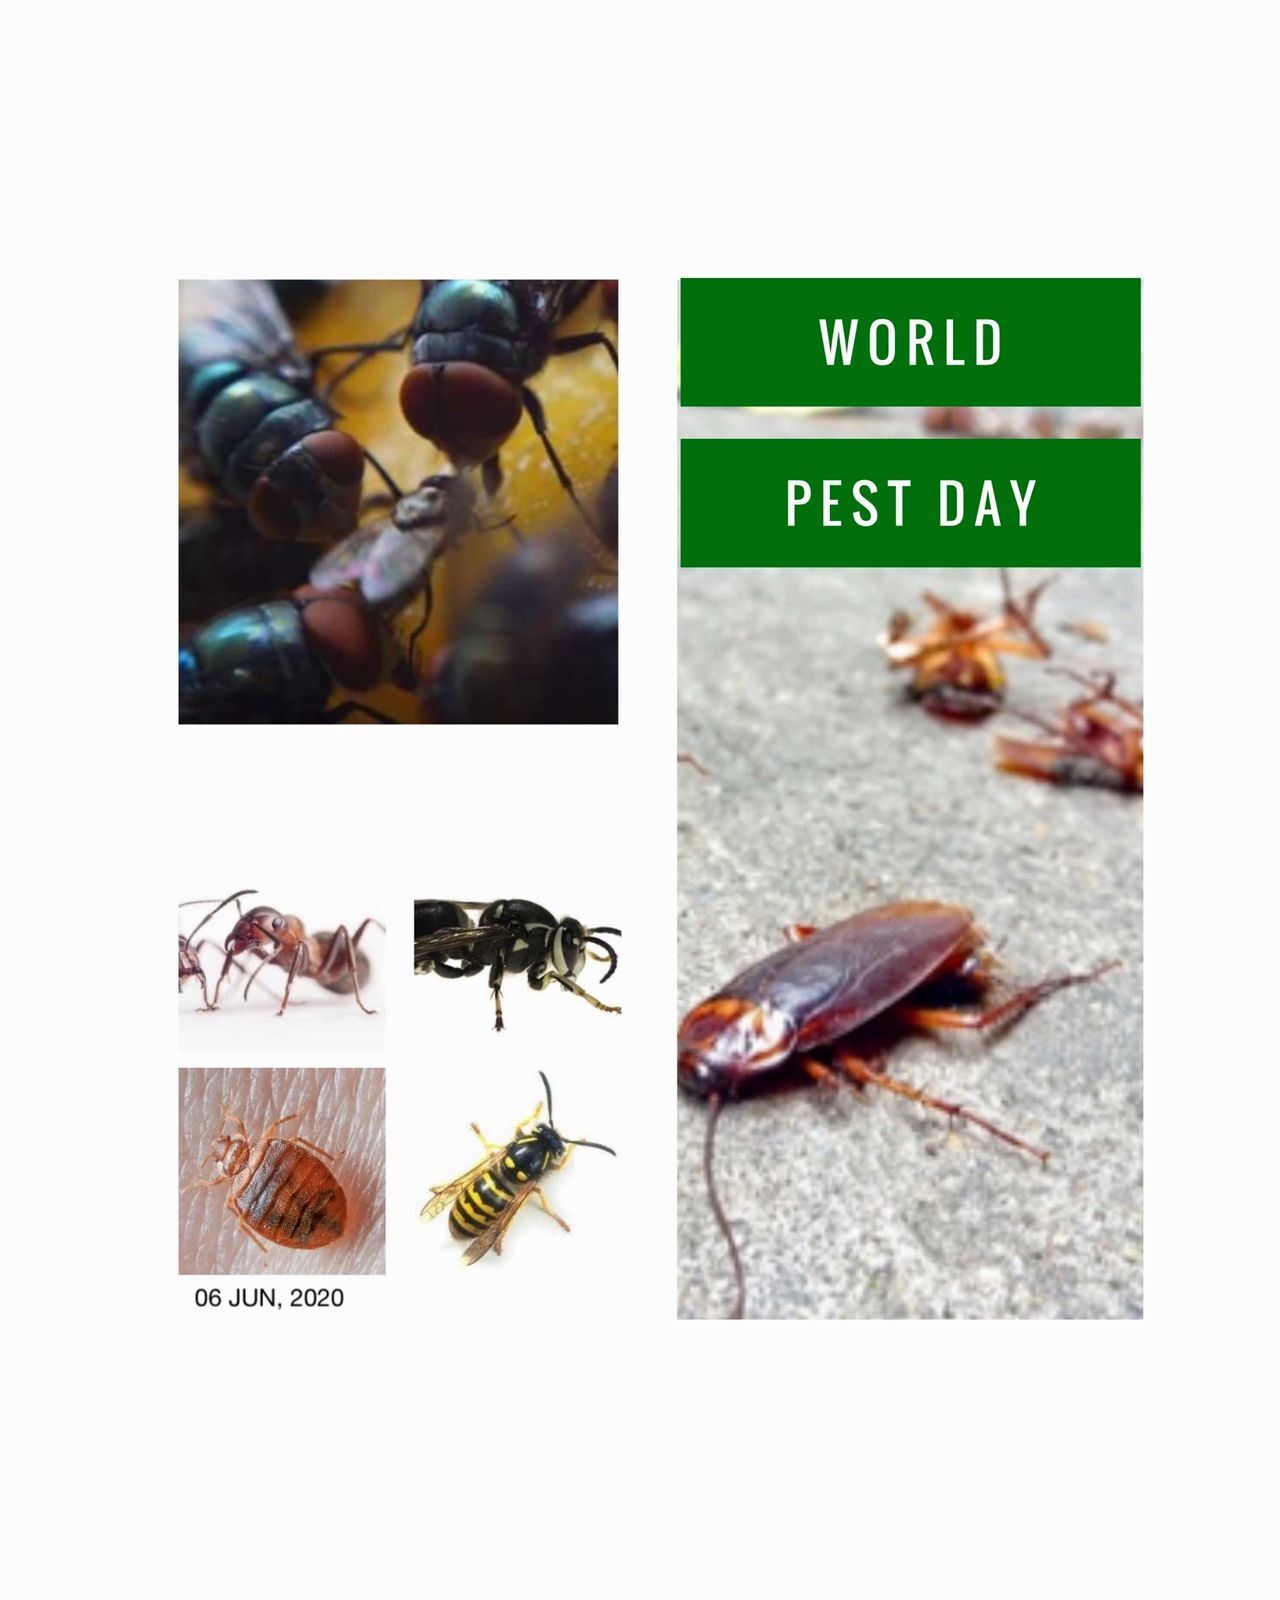 Photos of bugs for world pest day